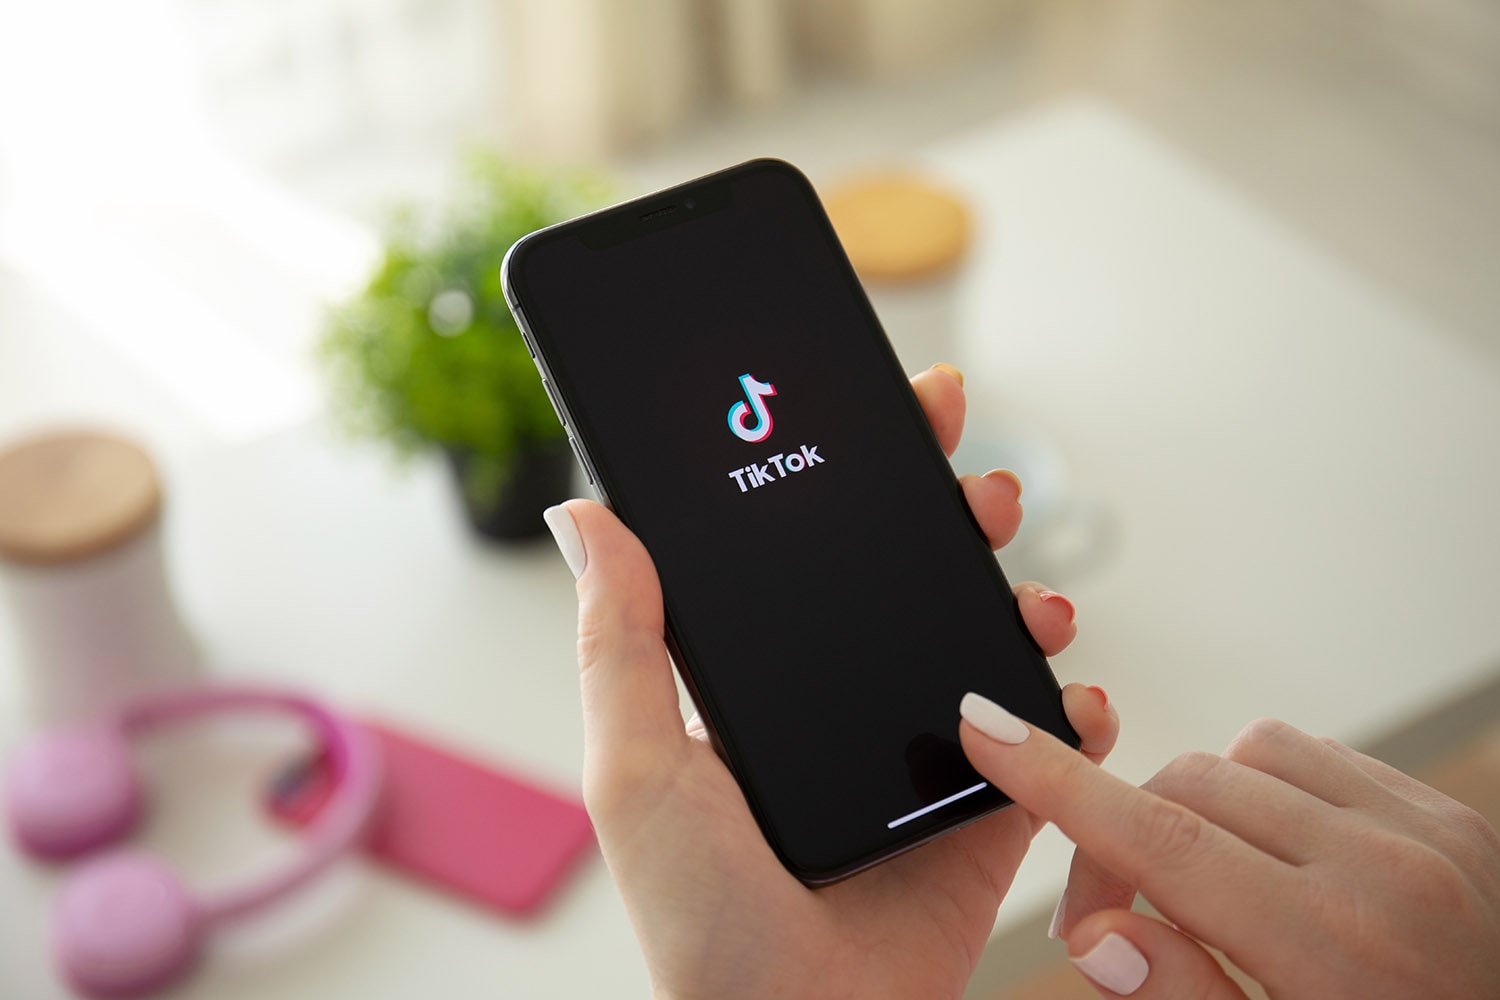 A person's hand holds a smartphone with the TikTok logo on the screen